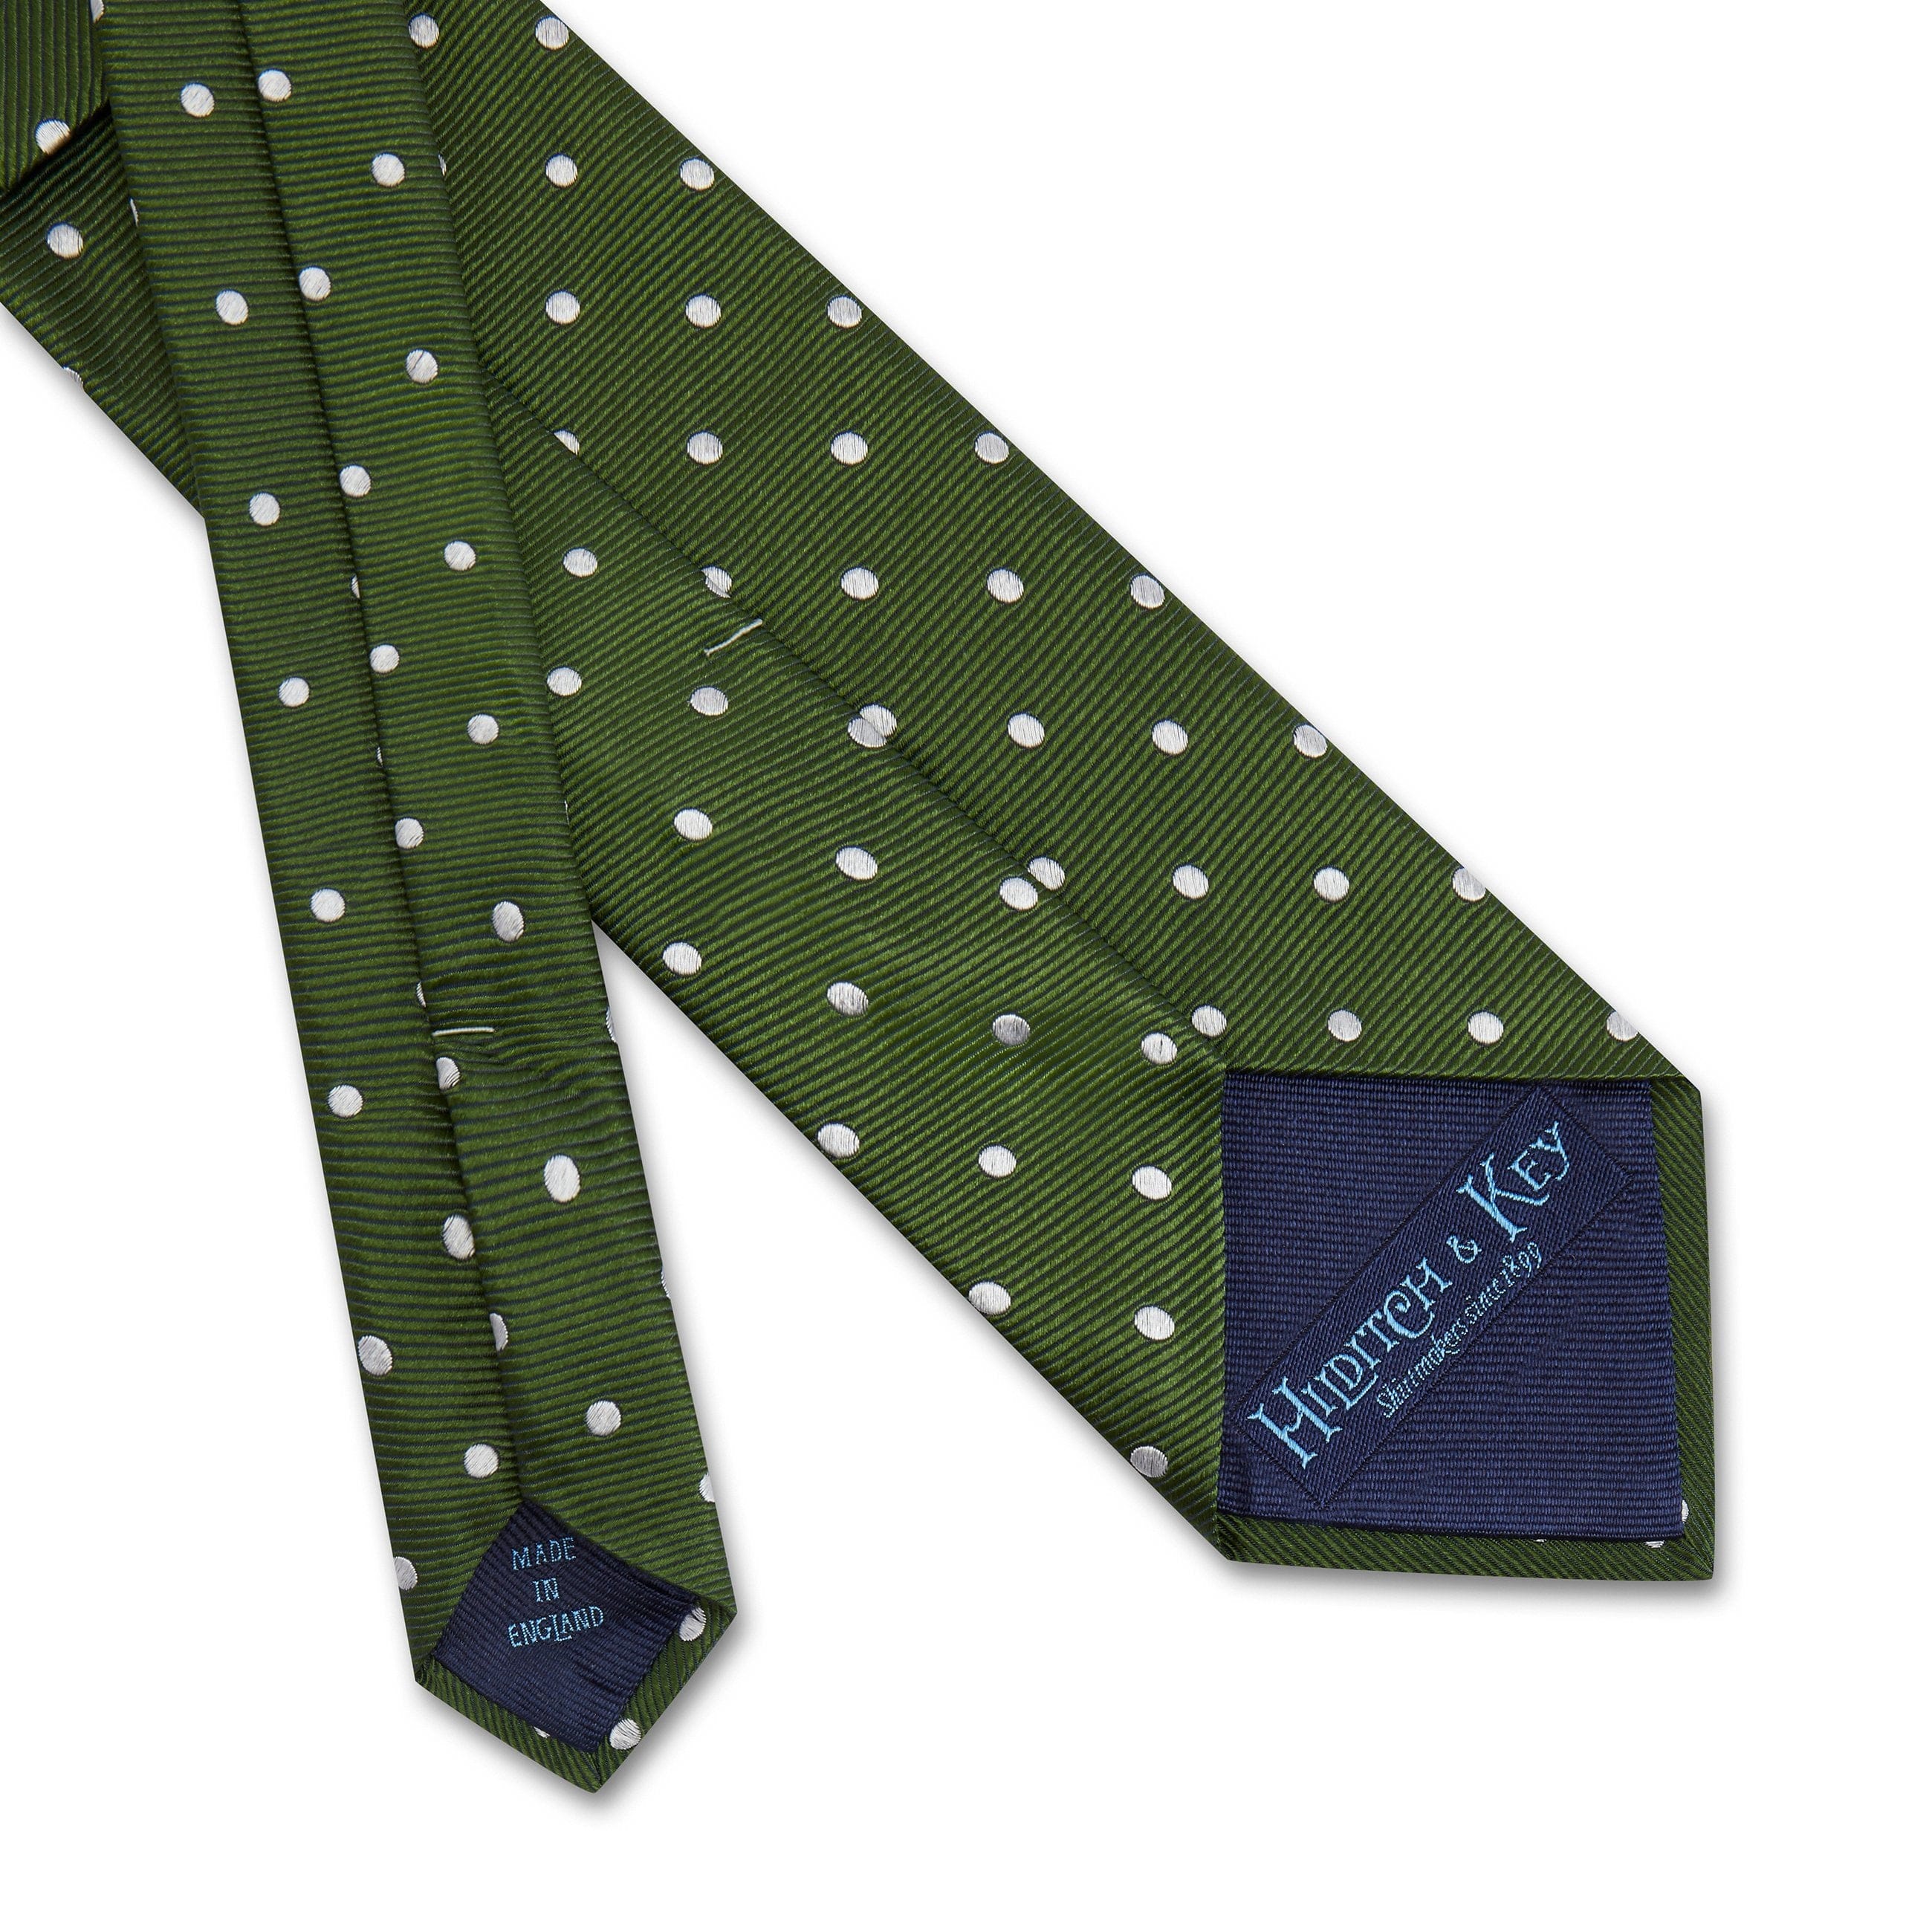 Green Twill with White Spots Woven Silk Tie - Hilditch & Key